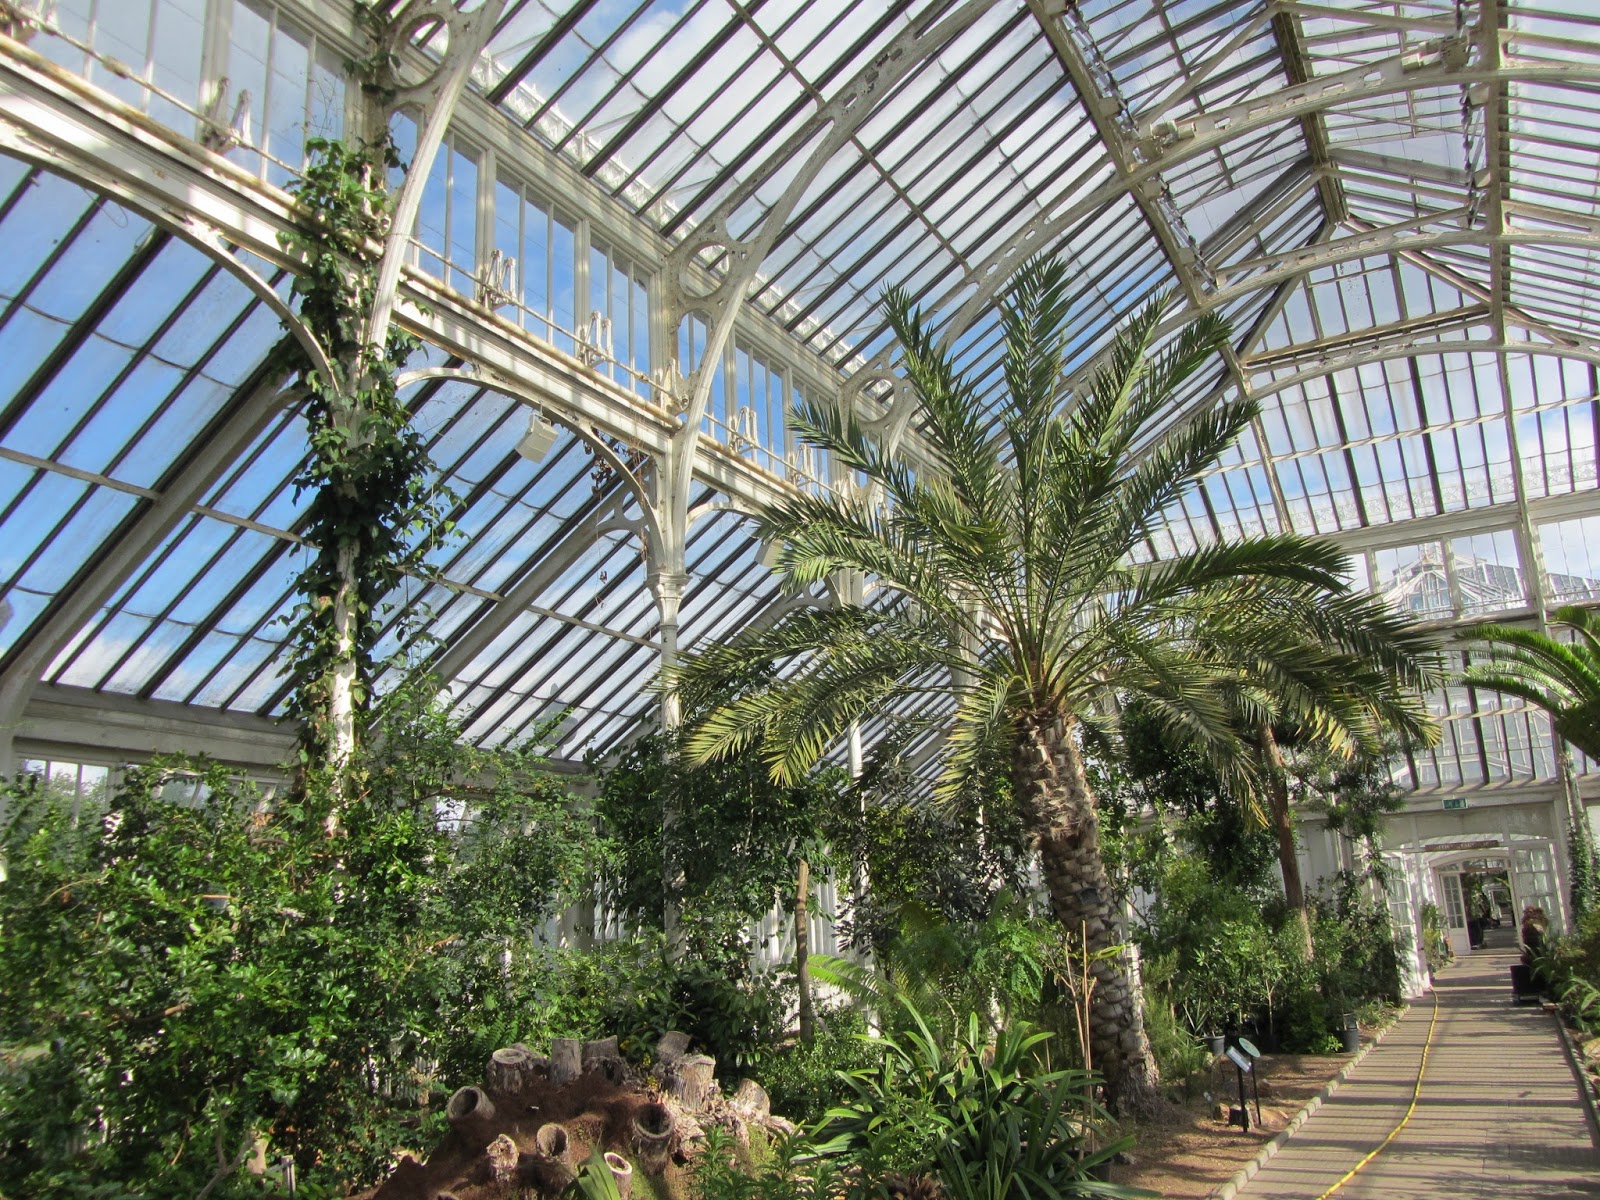 Ham Life: A last look at the Temperate House in Kew Gardens